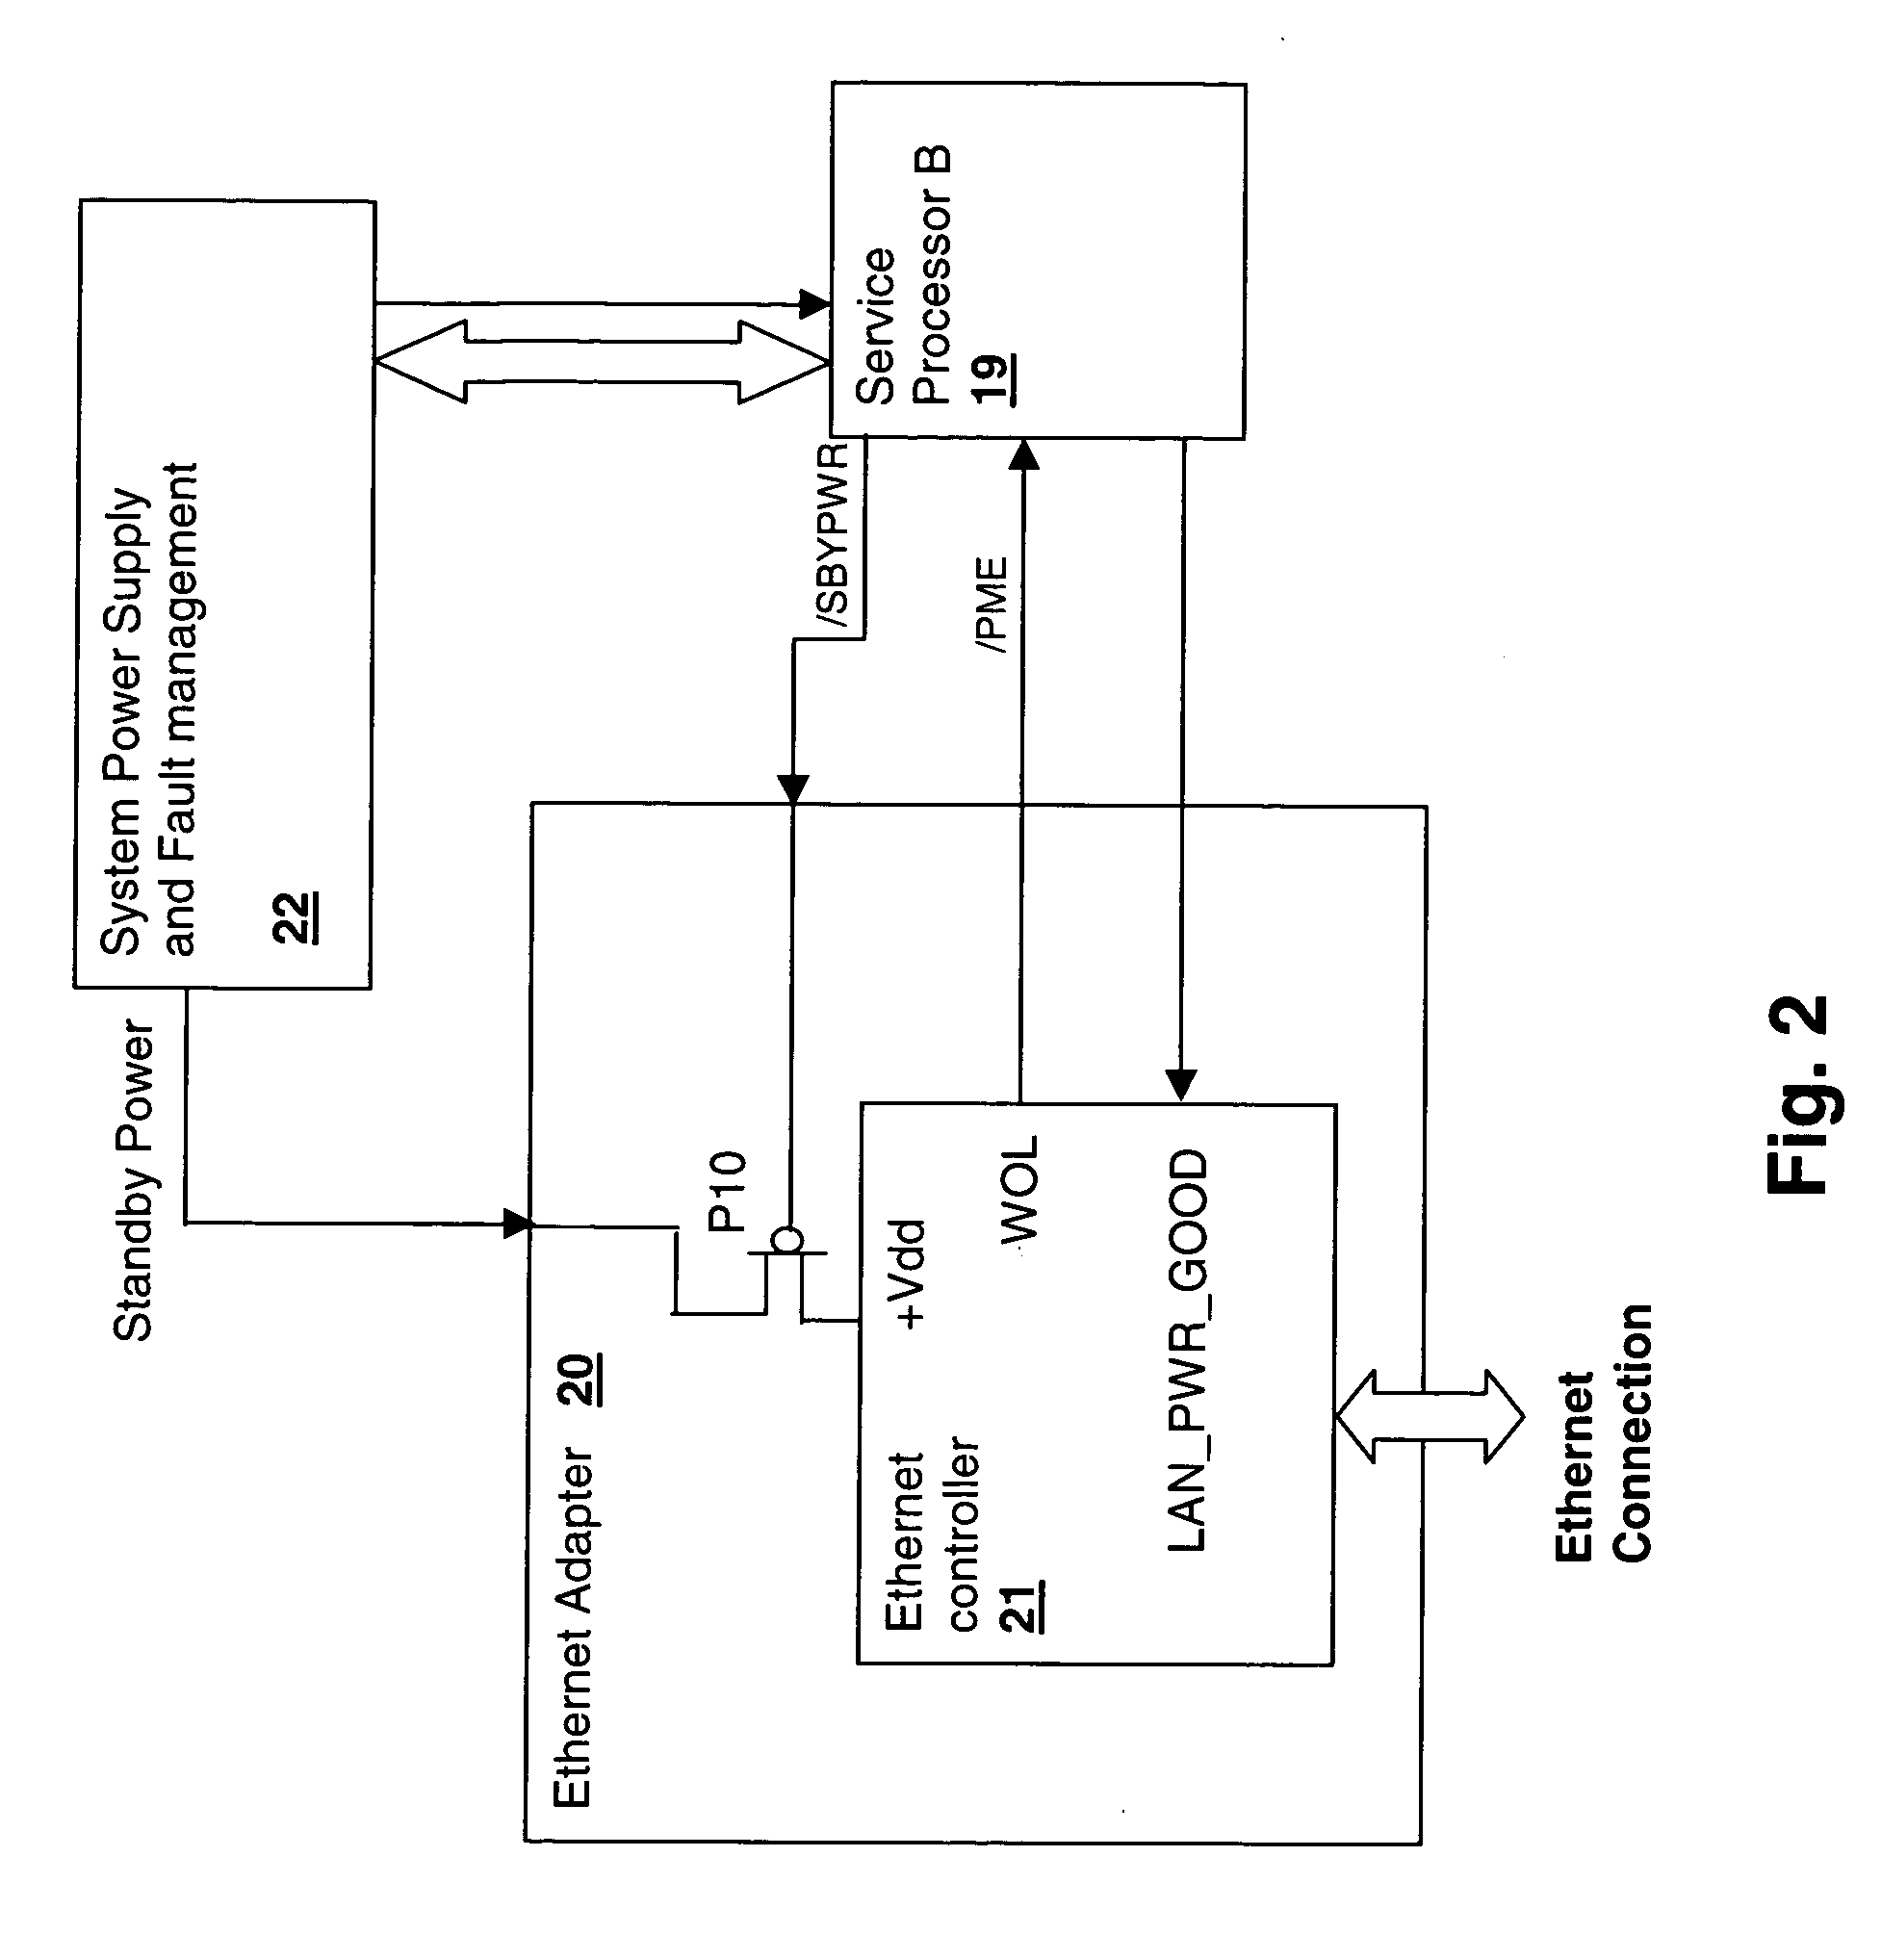 Method and system for managing peripheral connection wakeup in a processing system supporting multiple virtual machines